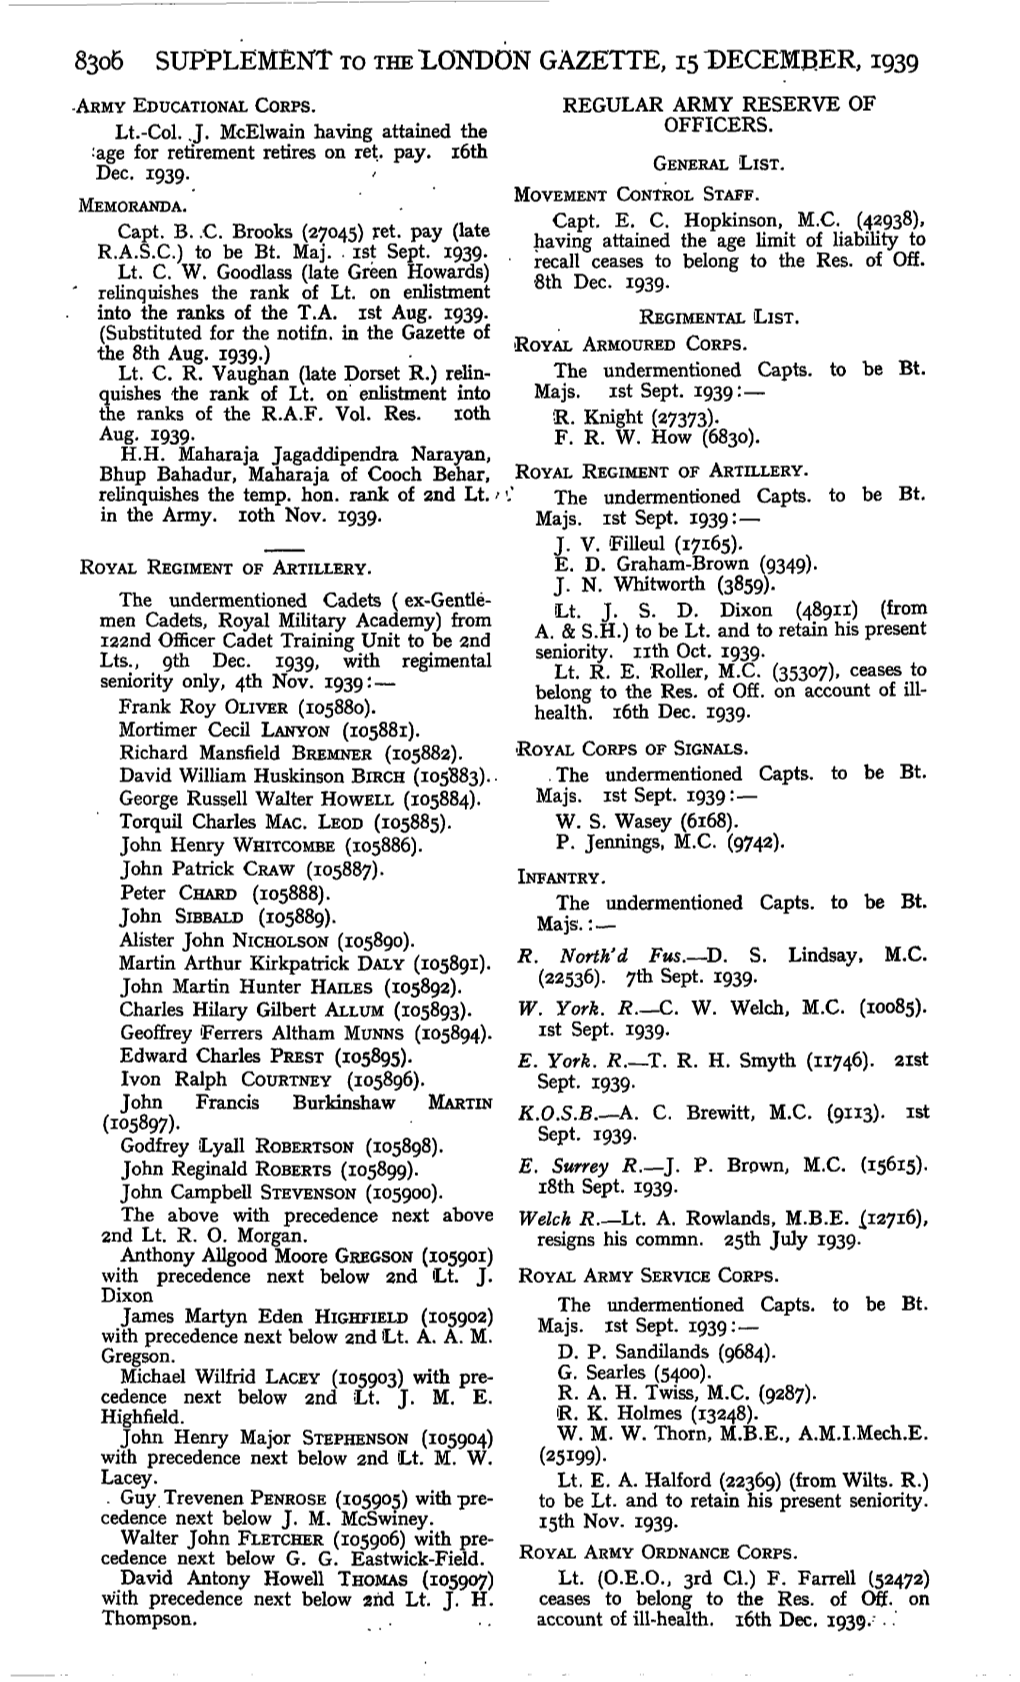 8306 Supplement to the London Gazette, 15 December, 1939 -Army Educational Corps